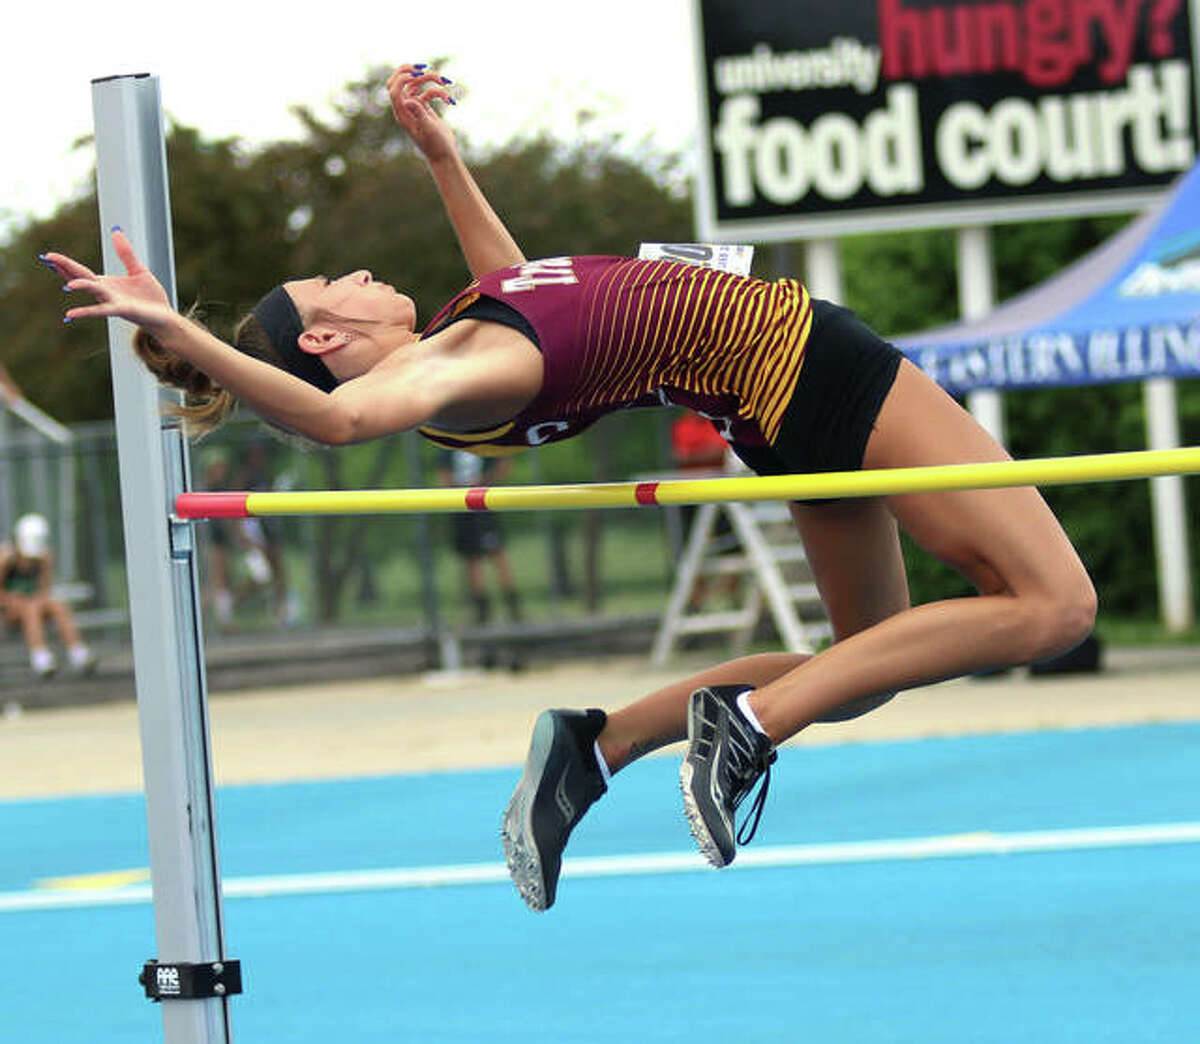 EA-WR senior Hannah Sechrest gets over the bar at 5 feet, 2 inches in the high jump at the Class 2A state meet Friday at O’Brien Stadium in Charleston. Sechrest finished seventh in the event, adding the the eighth-place state medal she won as a sophomore.